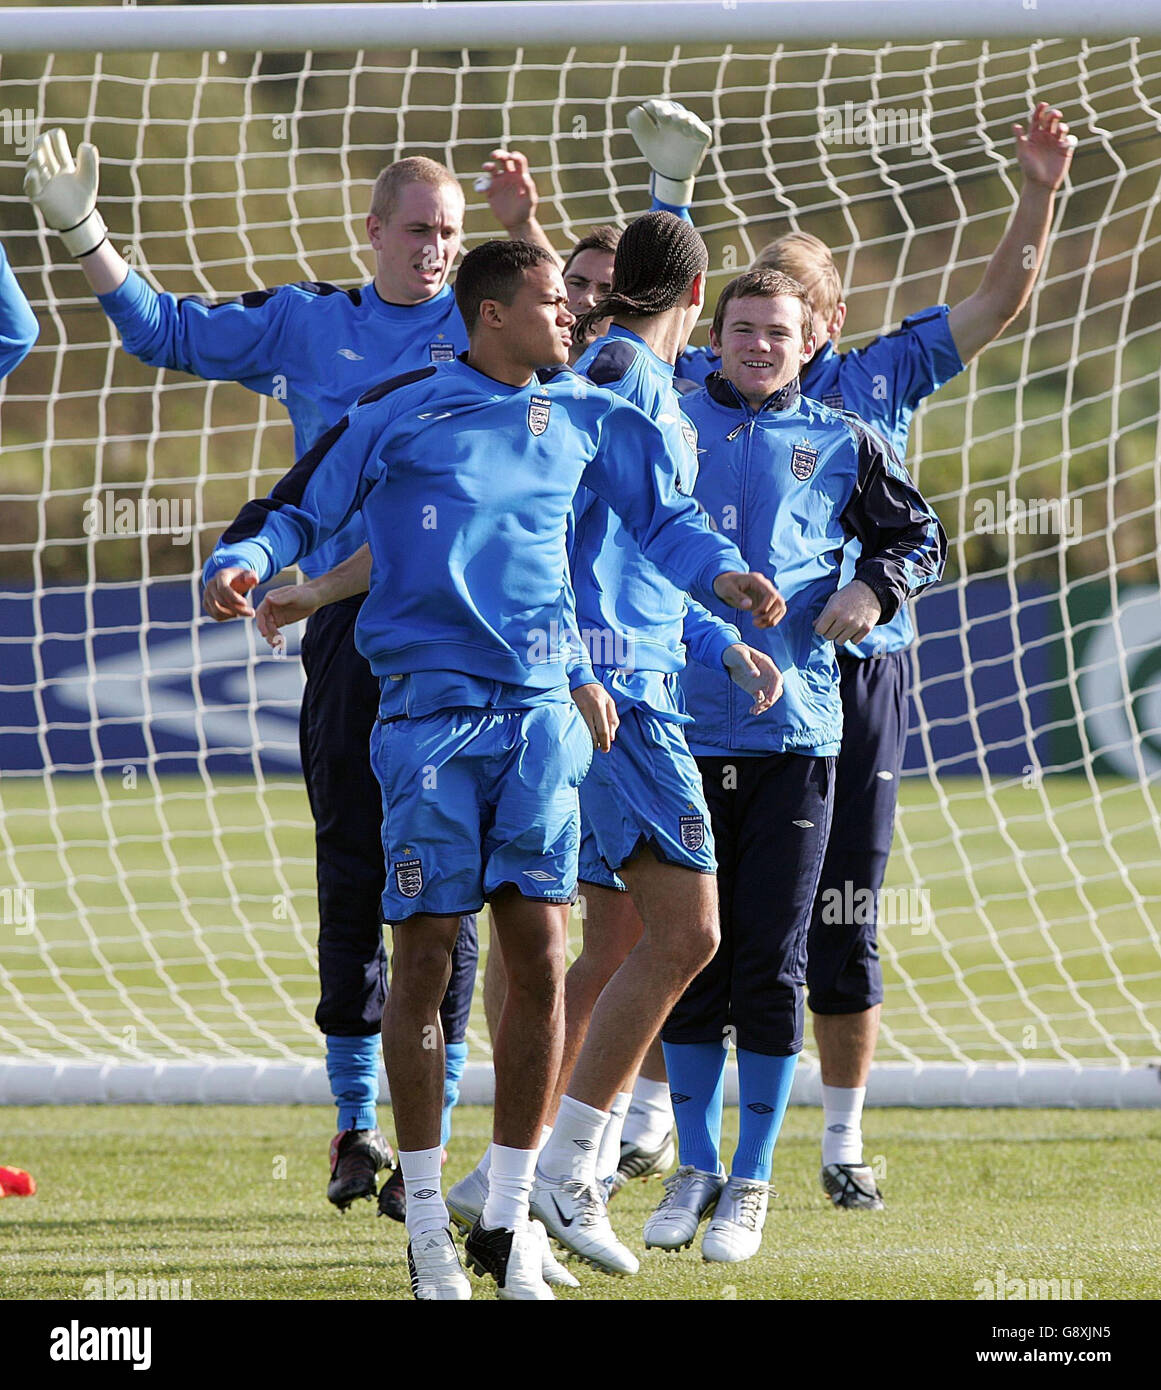 England's Kieron Dyer, Rio Ferdinand Wayne Rooney and Chris Kirkland during a training session at Carrington training ground, Manchester, Monday October 10, 2005, ahead of their World Cup qualifying match against Poland on Wednesday. PRESS ASSOCIATION Photo. Photo credit should read: Martin Rickett/PA. Stock Photo